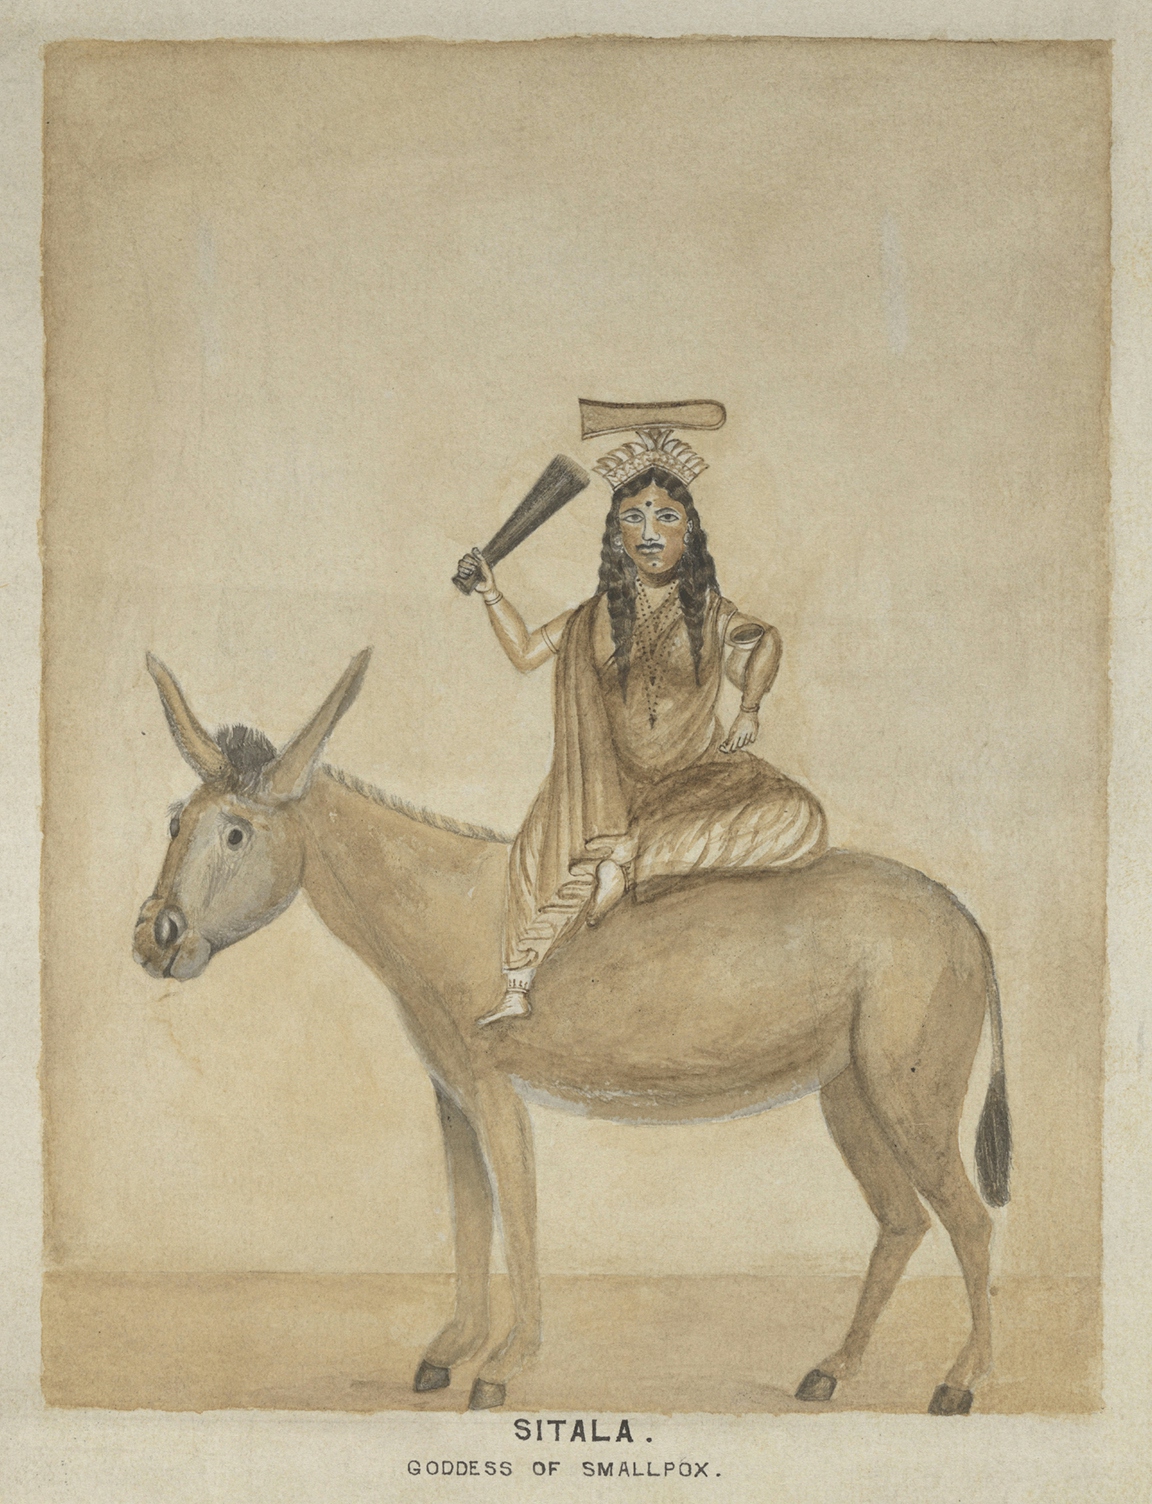 Drawing of a female Indian goddess sitting side-saddle on top of a donkey.